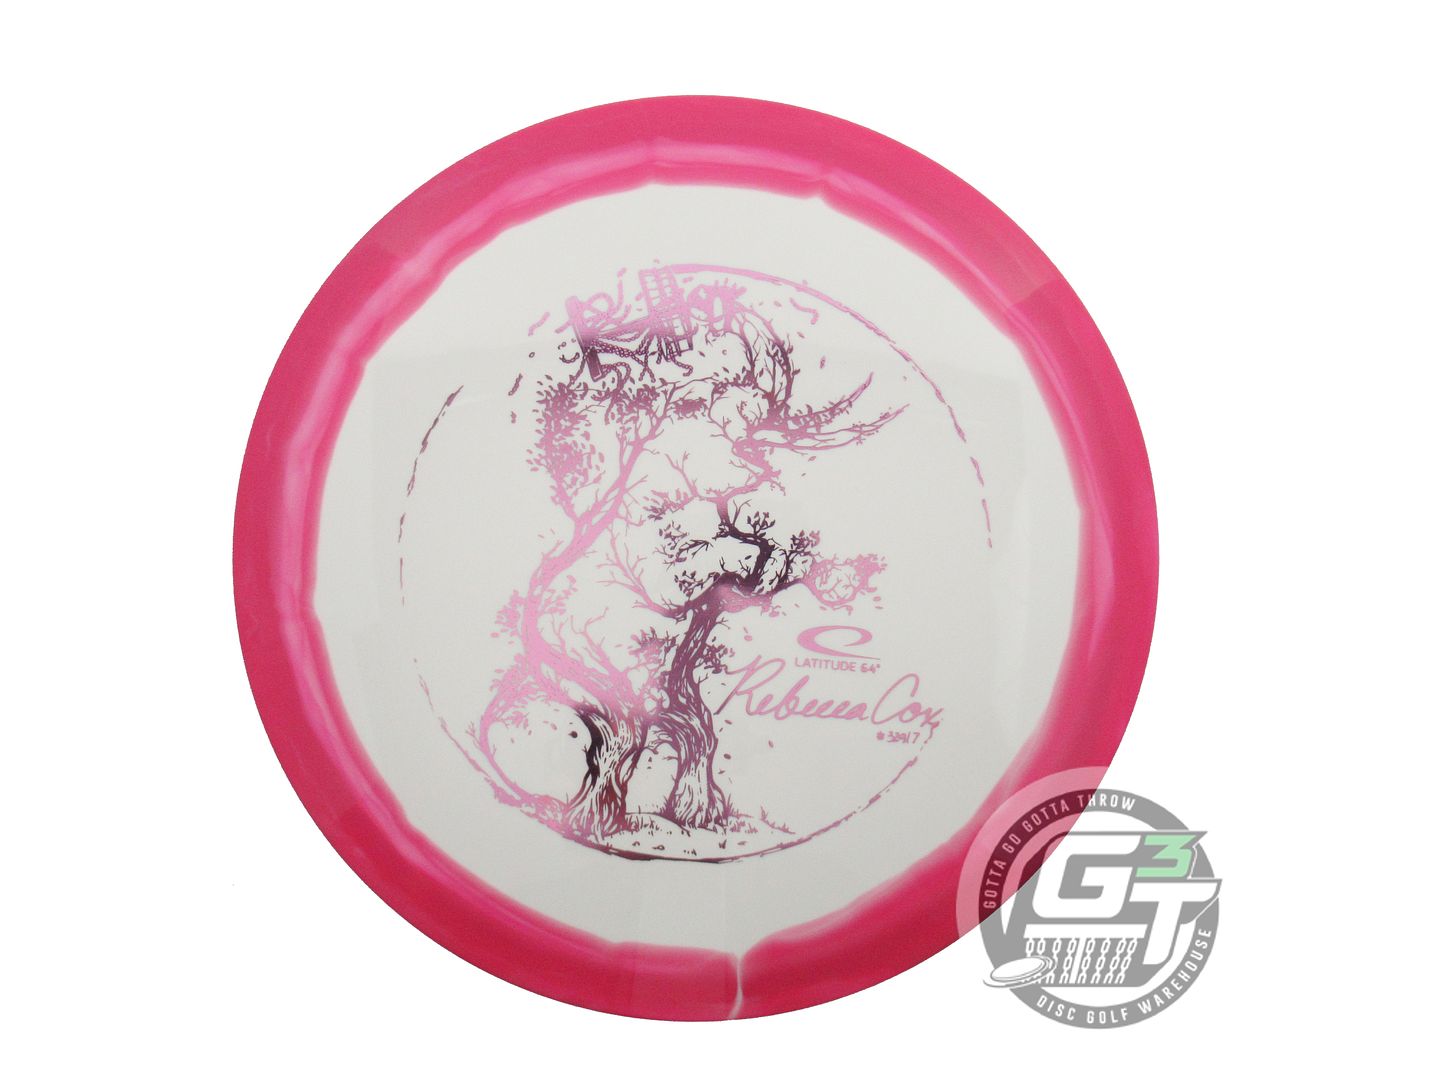 Latitude 64 Limited Edition 2023 Team Series Rebecca Cox Royal Grand Orbit Glory Fairway Driver Golf Disc (Individually Listed)